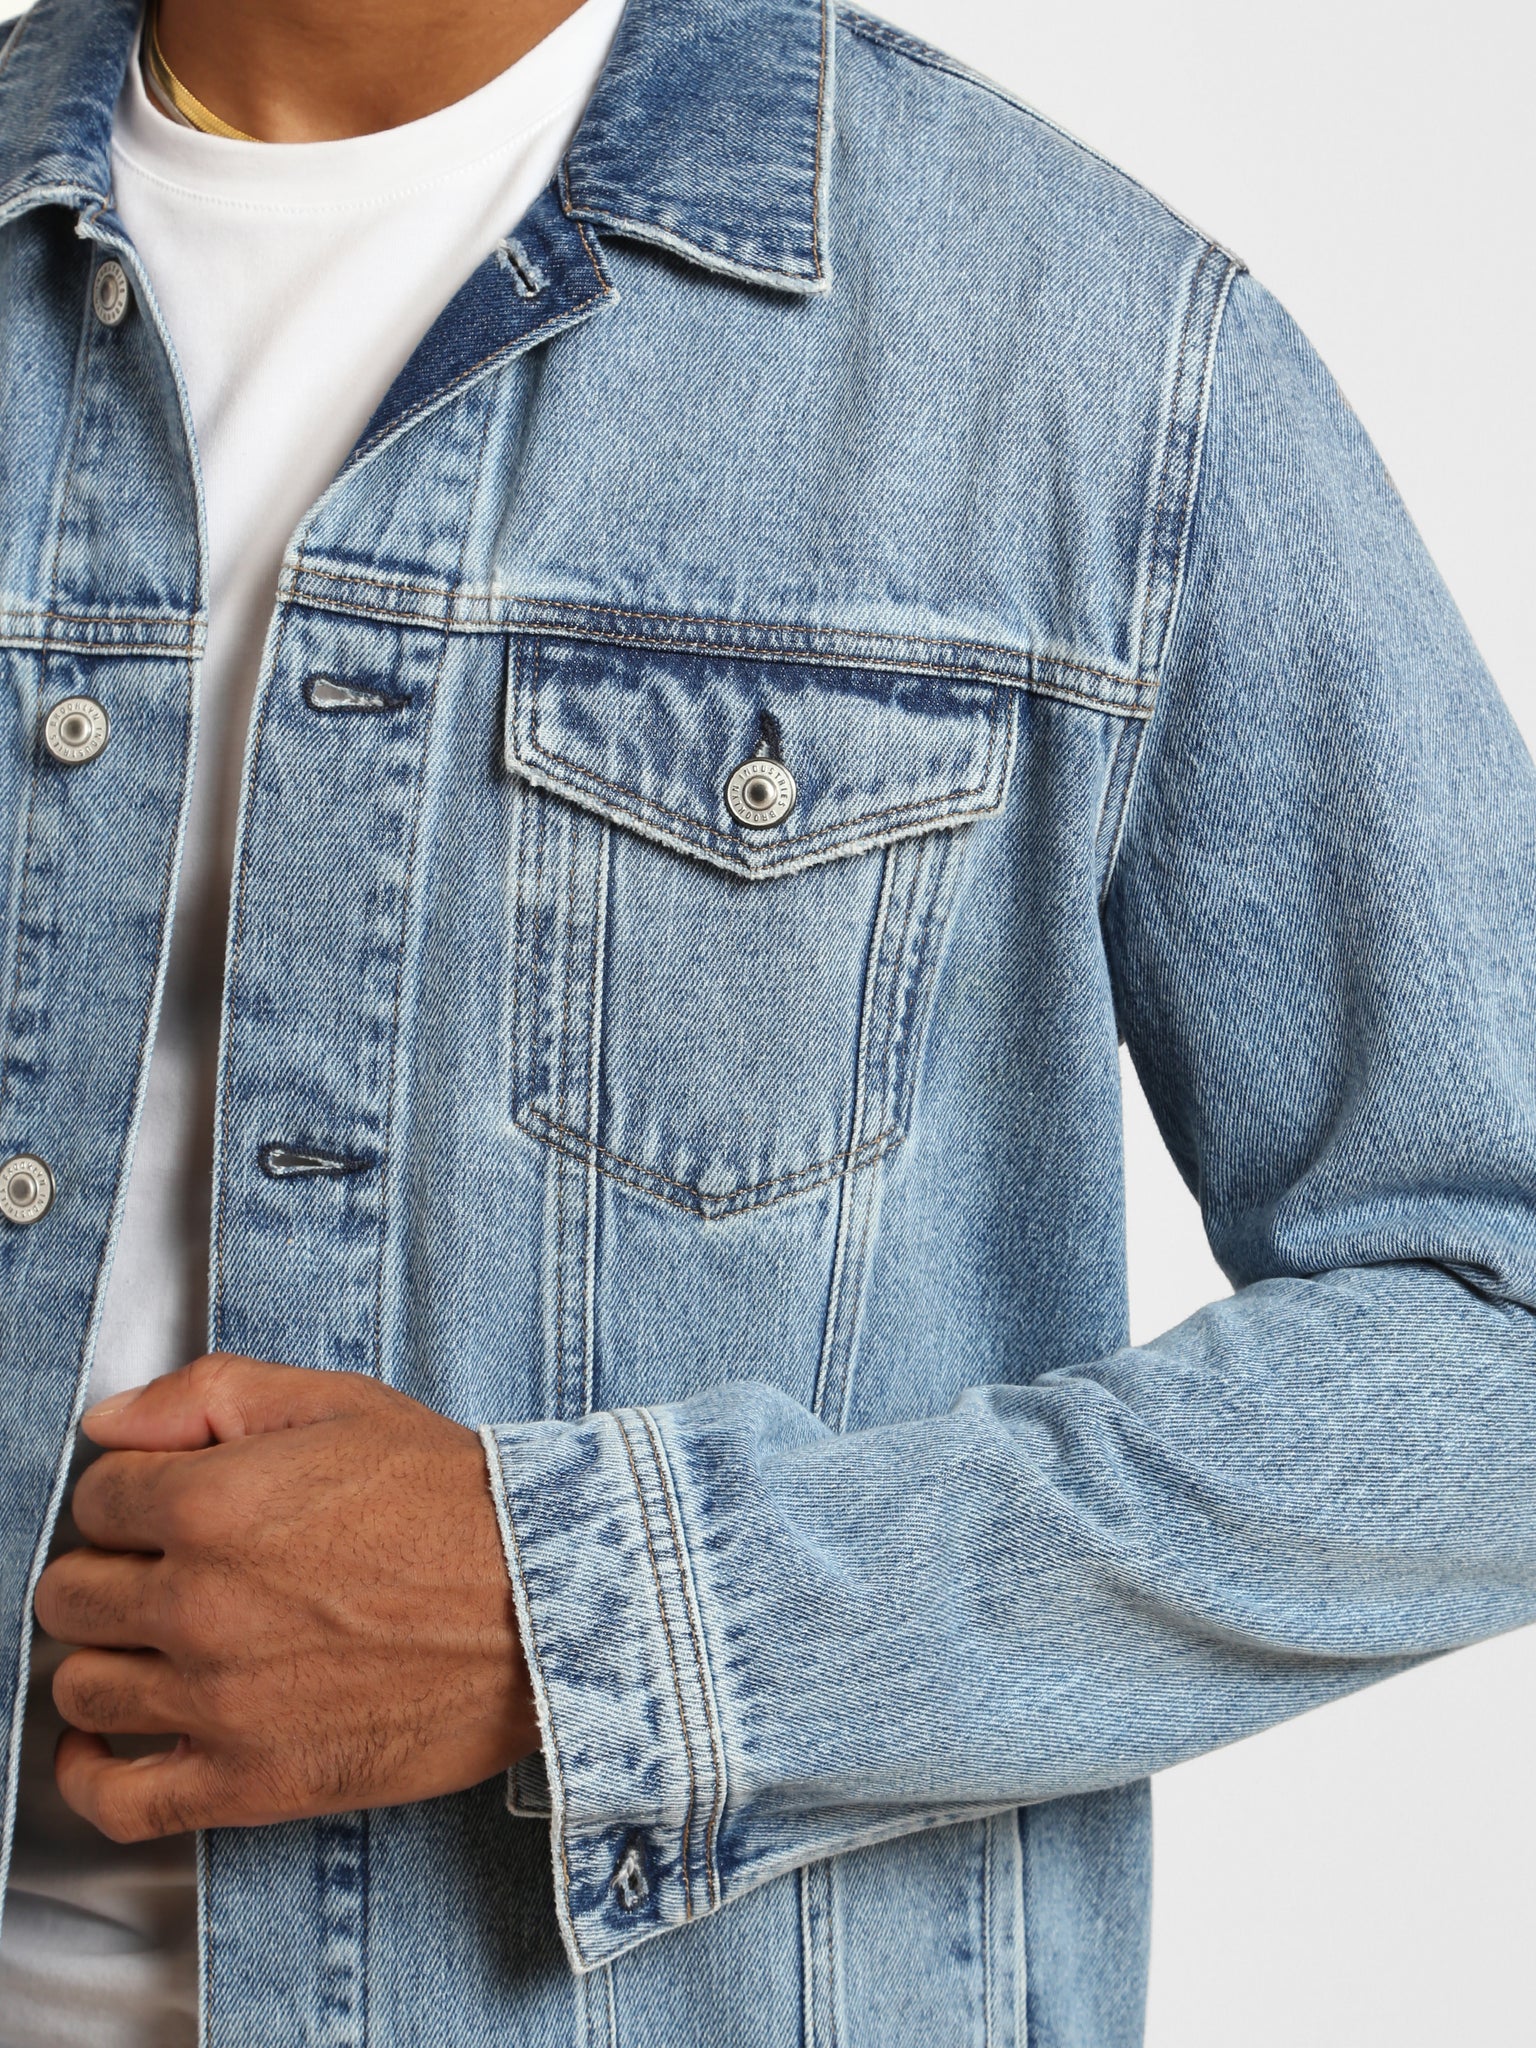 The Best Denim Jackets for Men to Buy Now and Own Forever | Gear Patrol